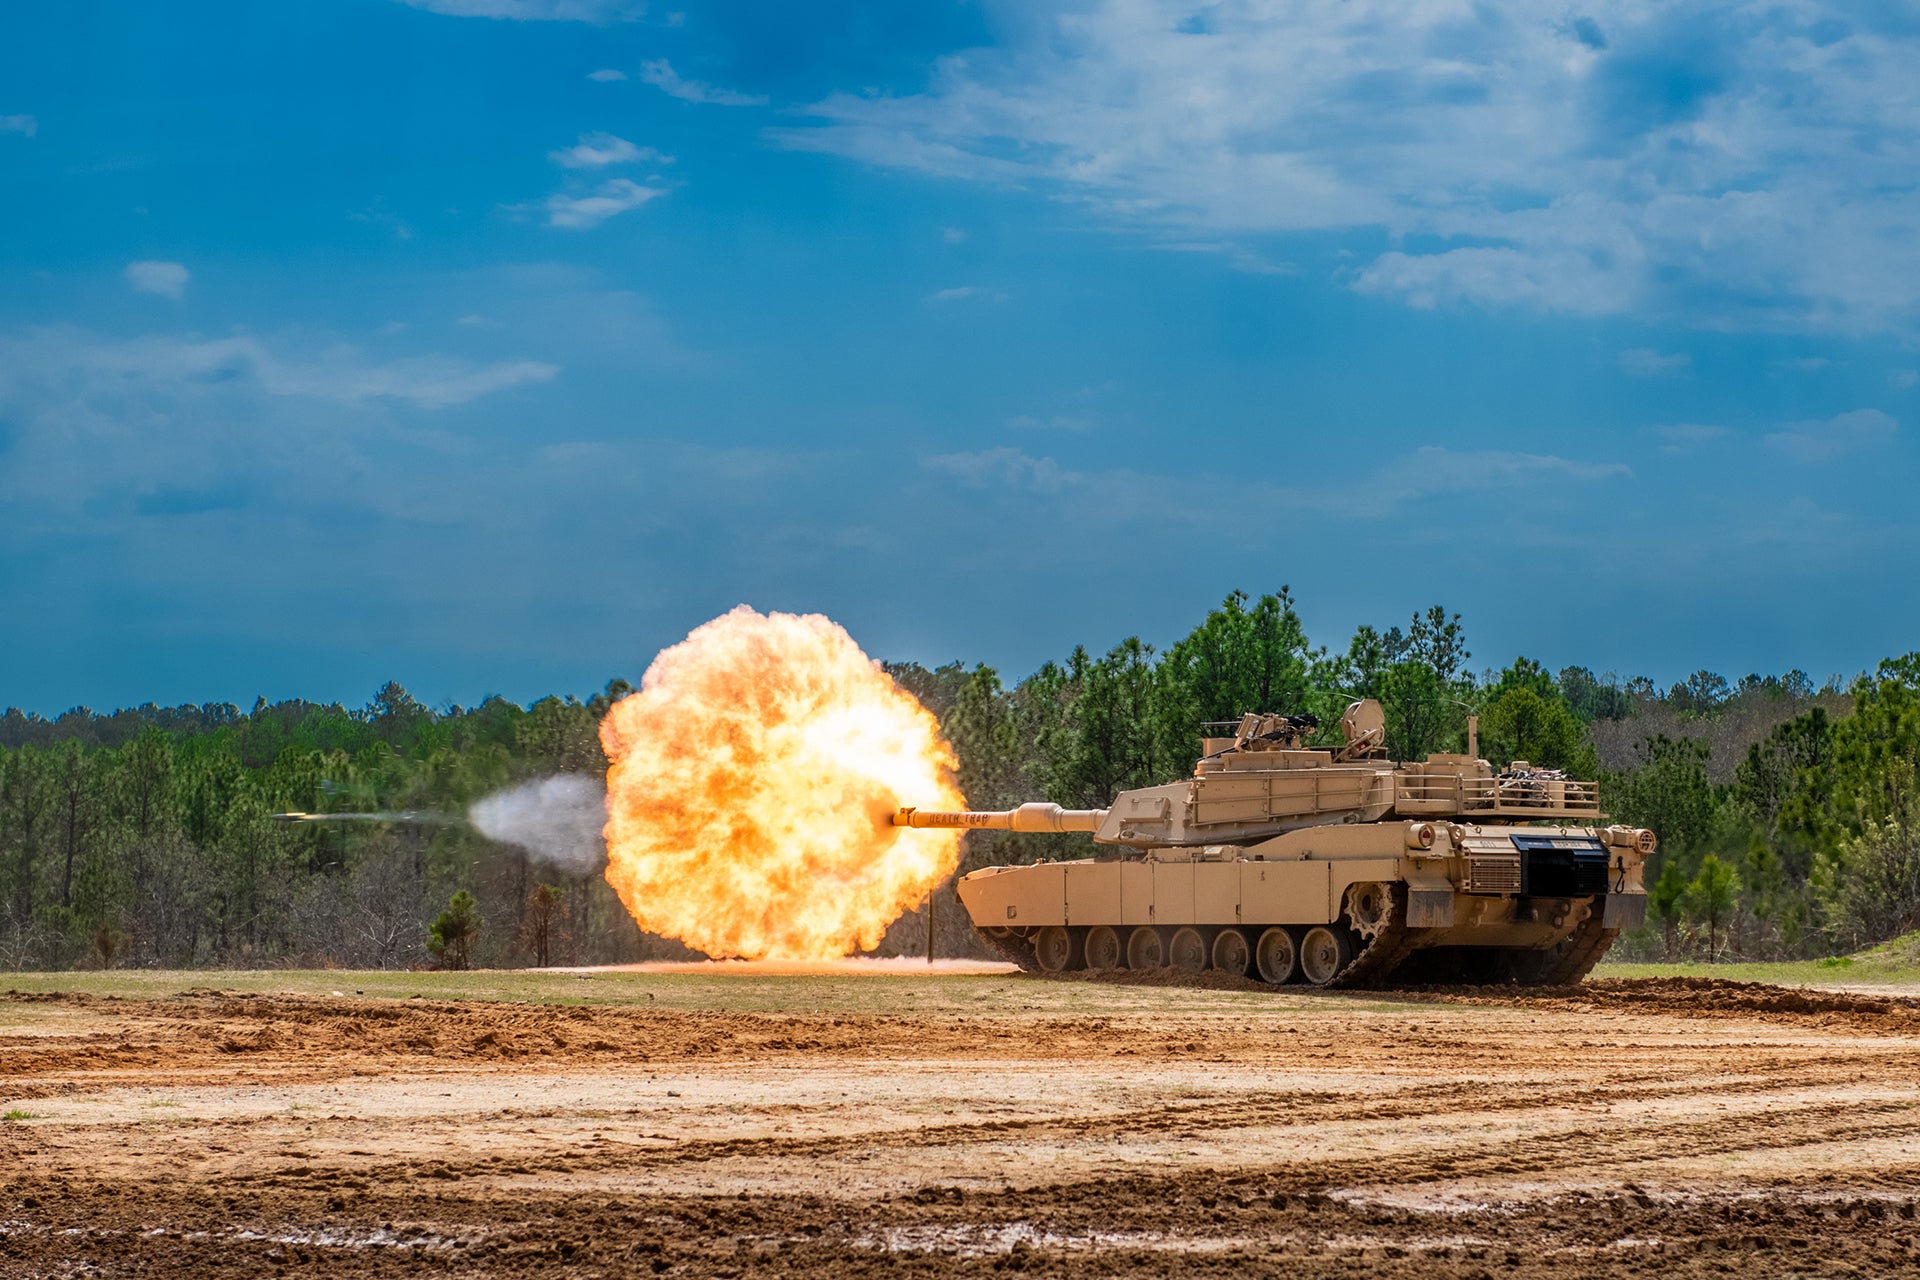 Soldiers assigned to the 316th Cavalry Brigade conduct a HOTEX Live Fire demonstration for African Land Forces Summit attendees March 24, 2022, at Red Cloud Range, Fort Benning, Georgia. (Patrick A. Albright/U.S. Army)